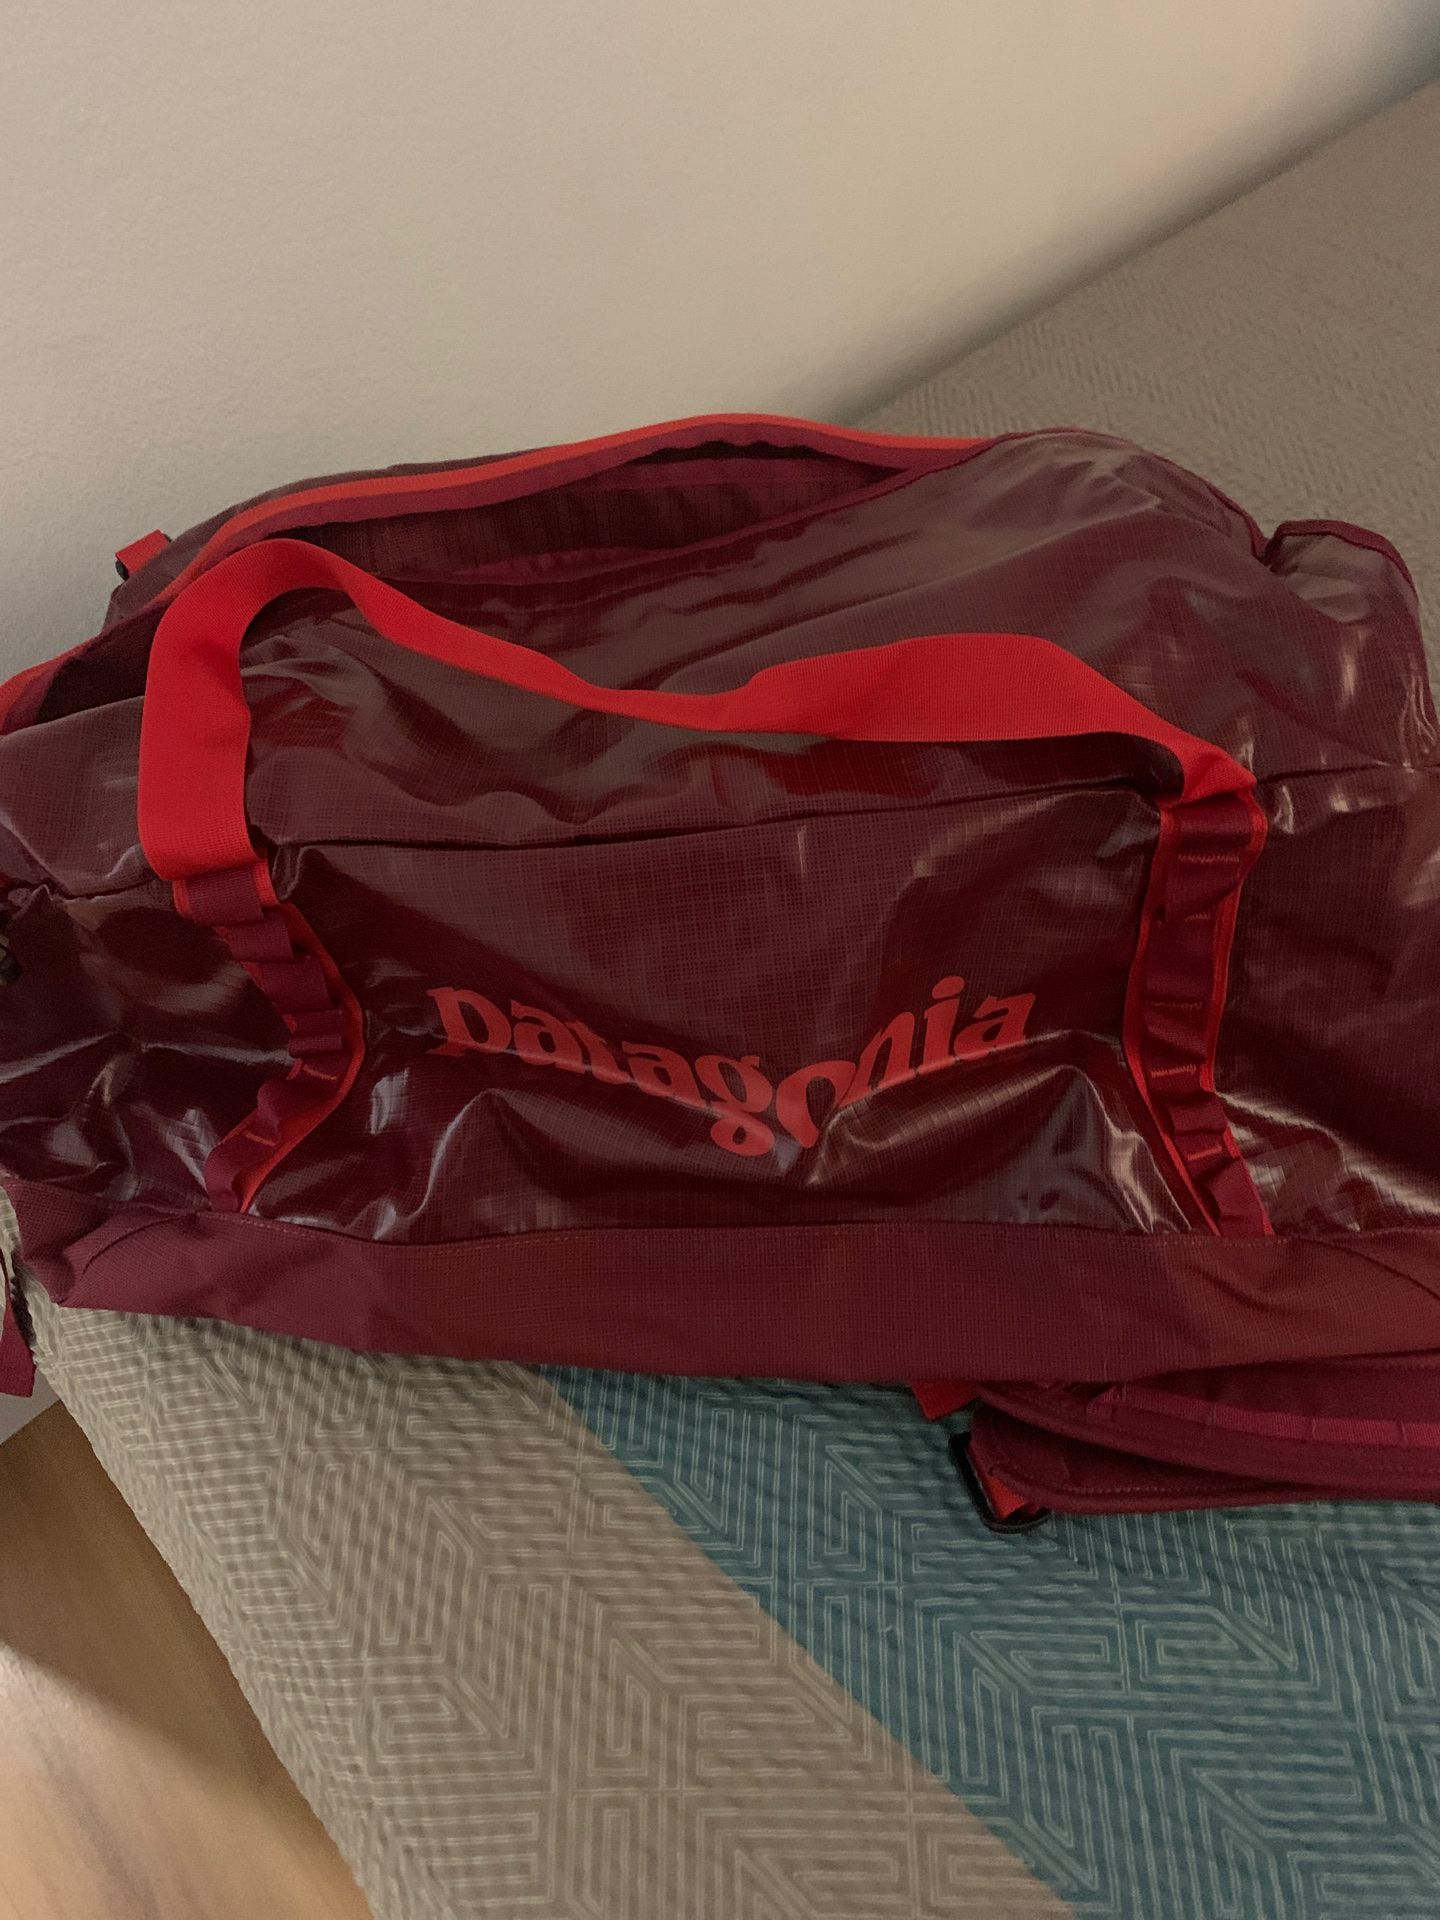 Brand new 70L blackhole duffel bag red brand new with tags retails at $159 before tax.